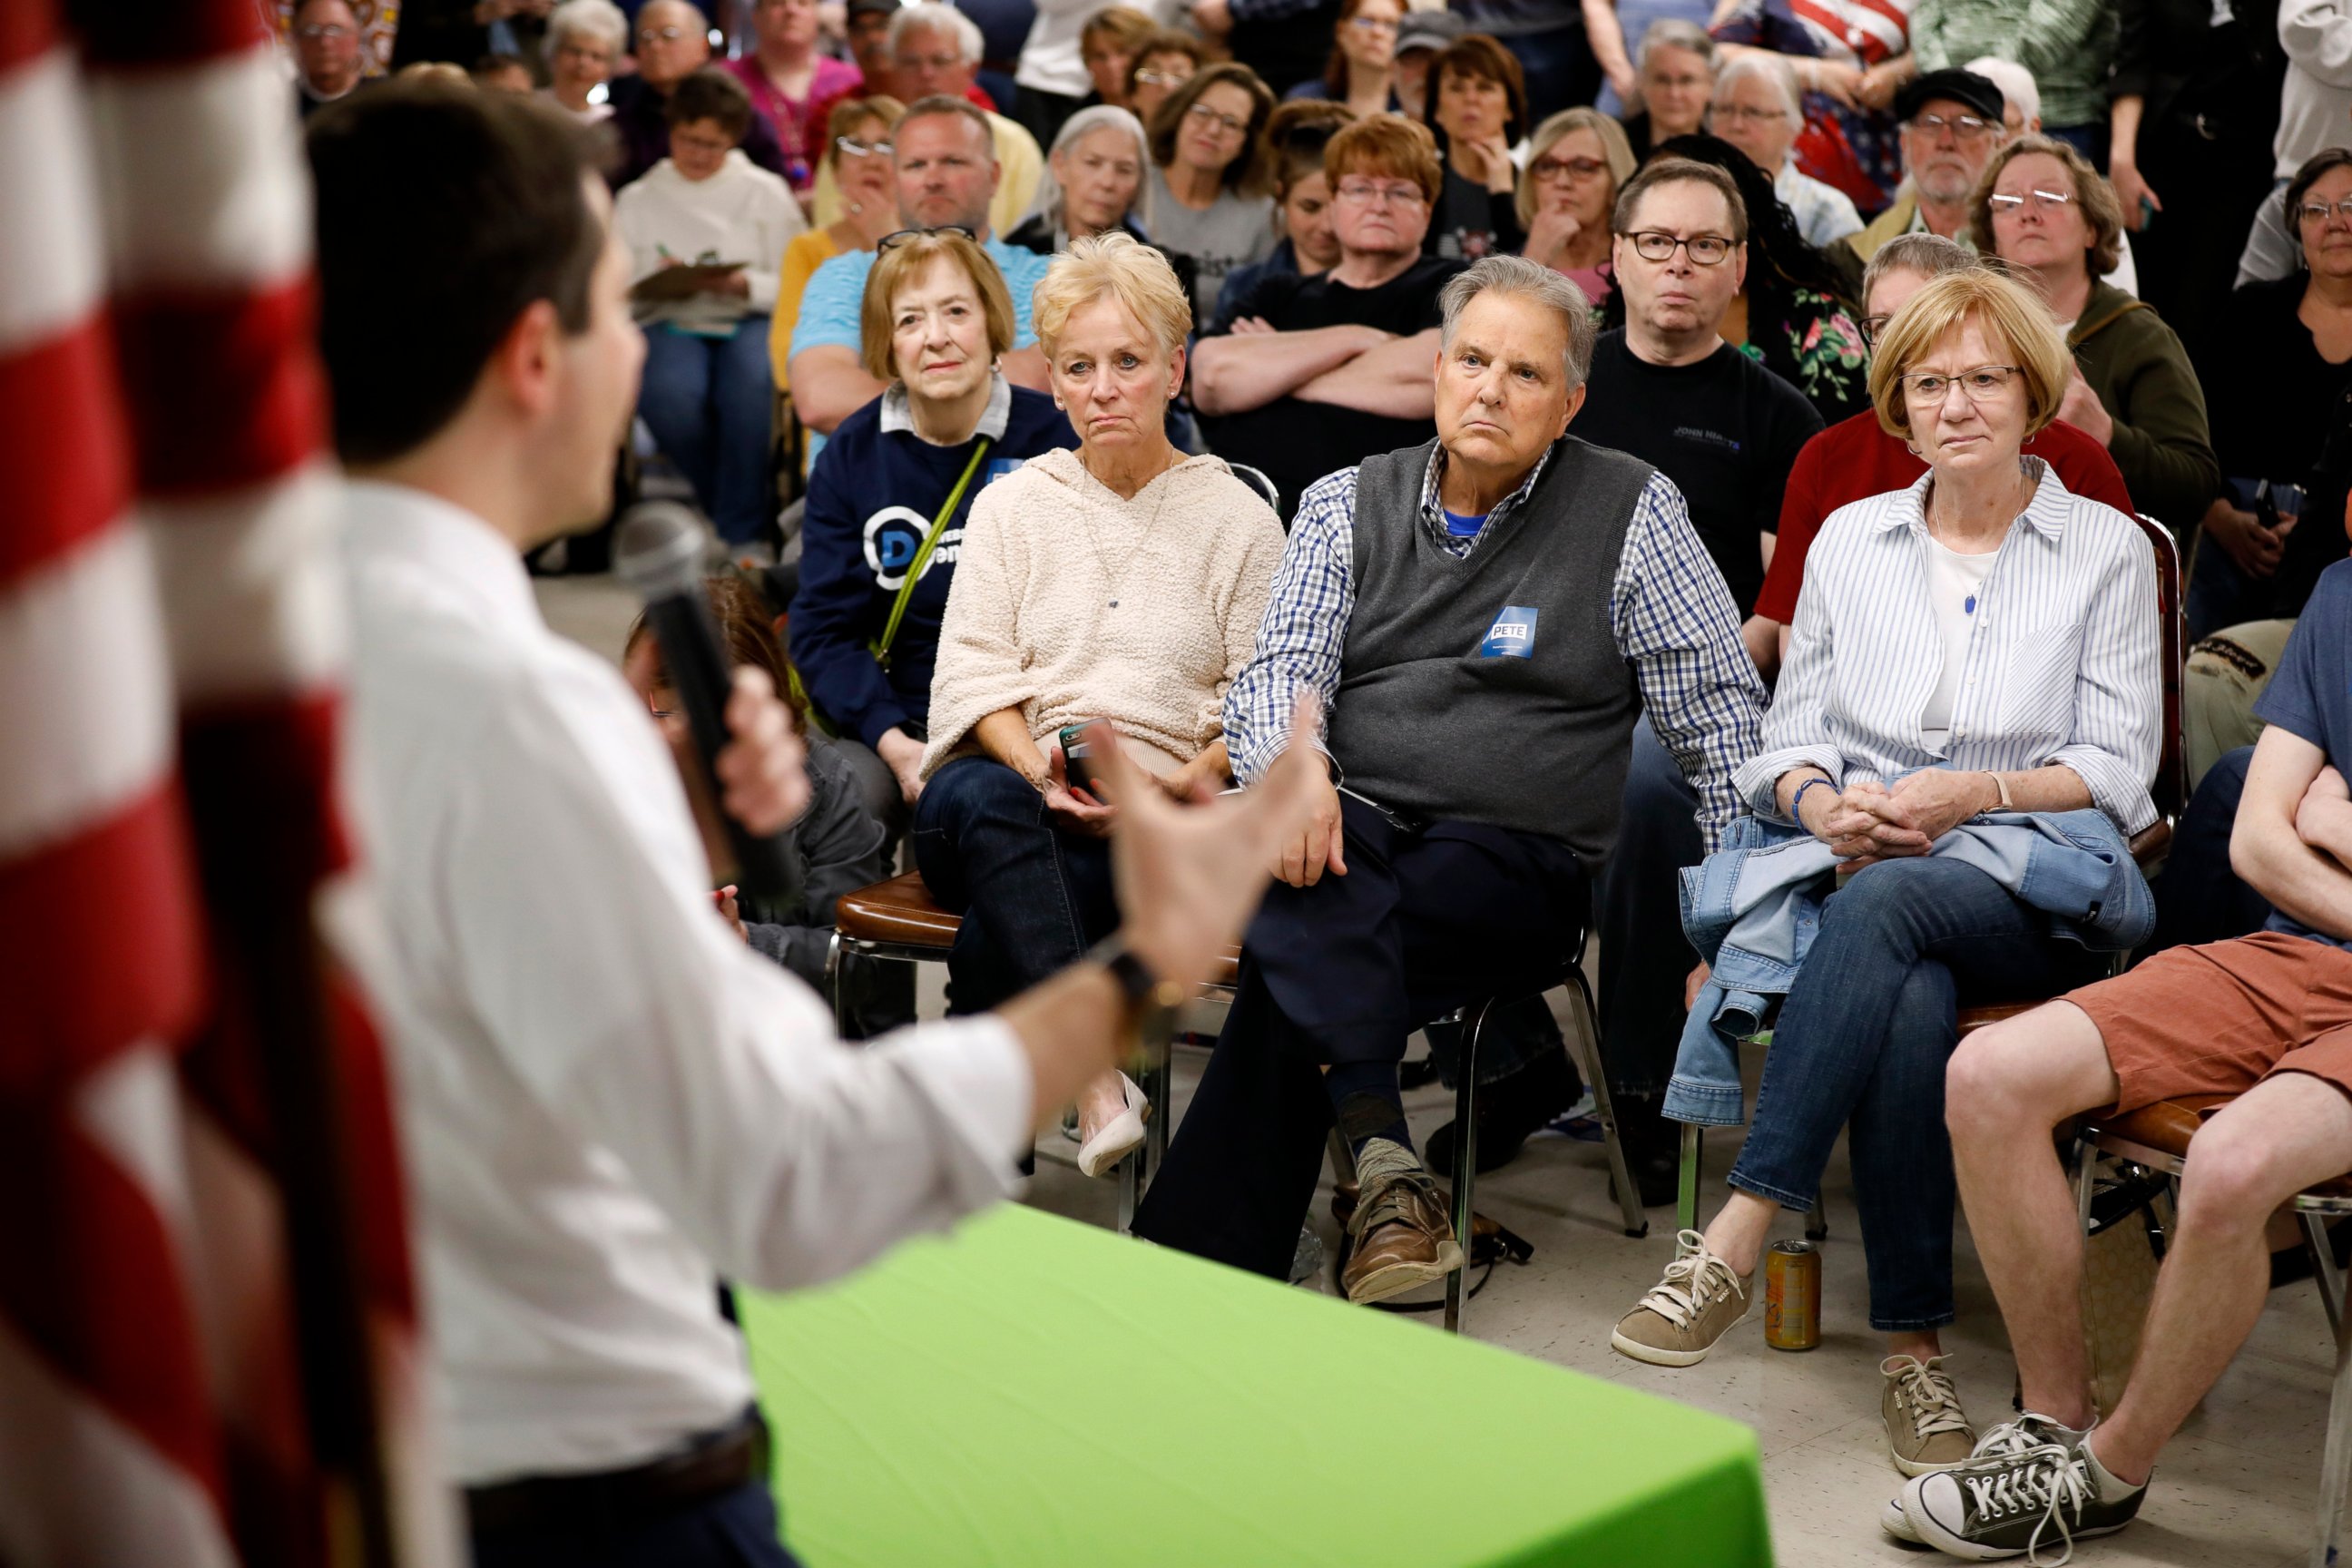 PHOTO: Audience members listen as 2020 Democratic presidential candidate South Bend Mayor Pete Buttigieg speaks during a town hall meeting, Tuesday, April 16, 2019, in Fort Dodge, Iowa.